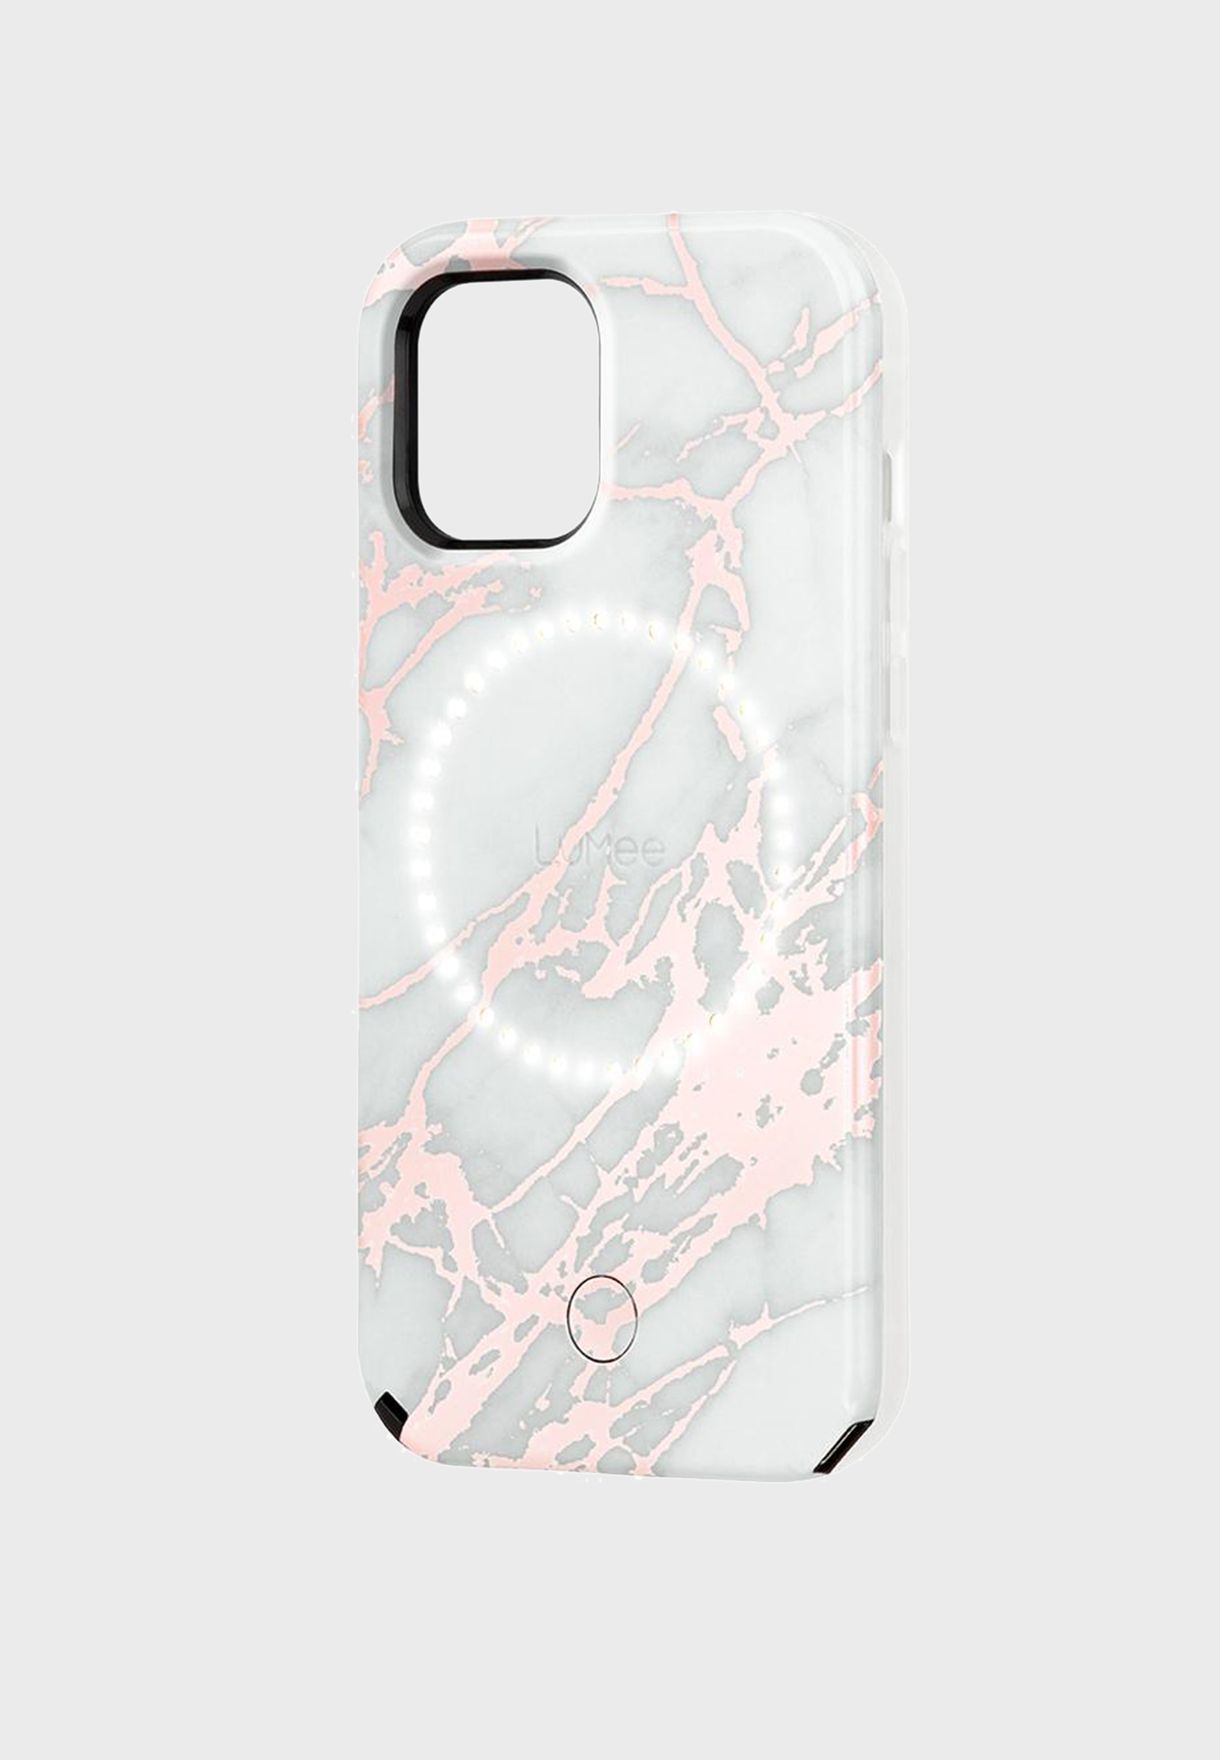 Halo Rose Gold iPhone 12/12 Pro Max Case